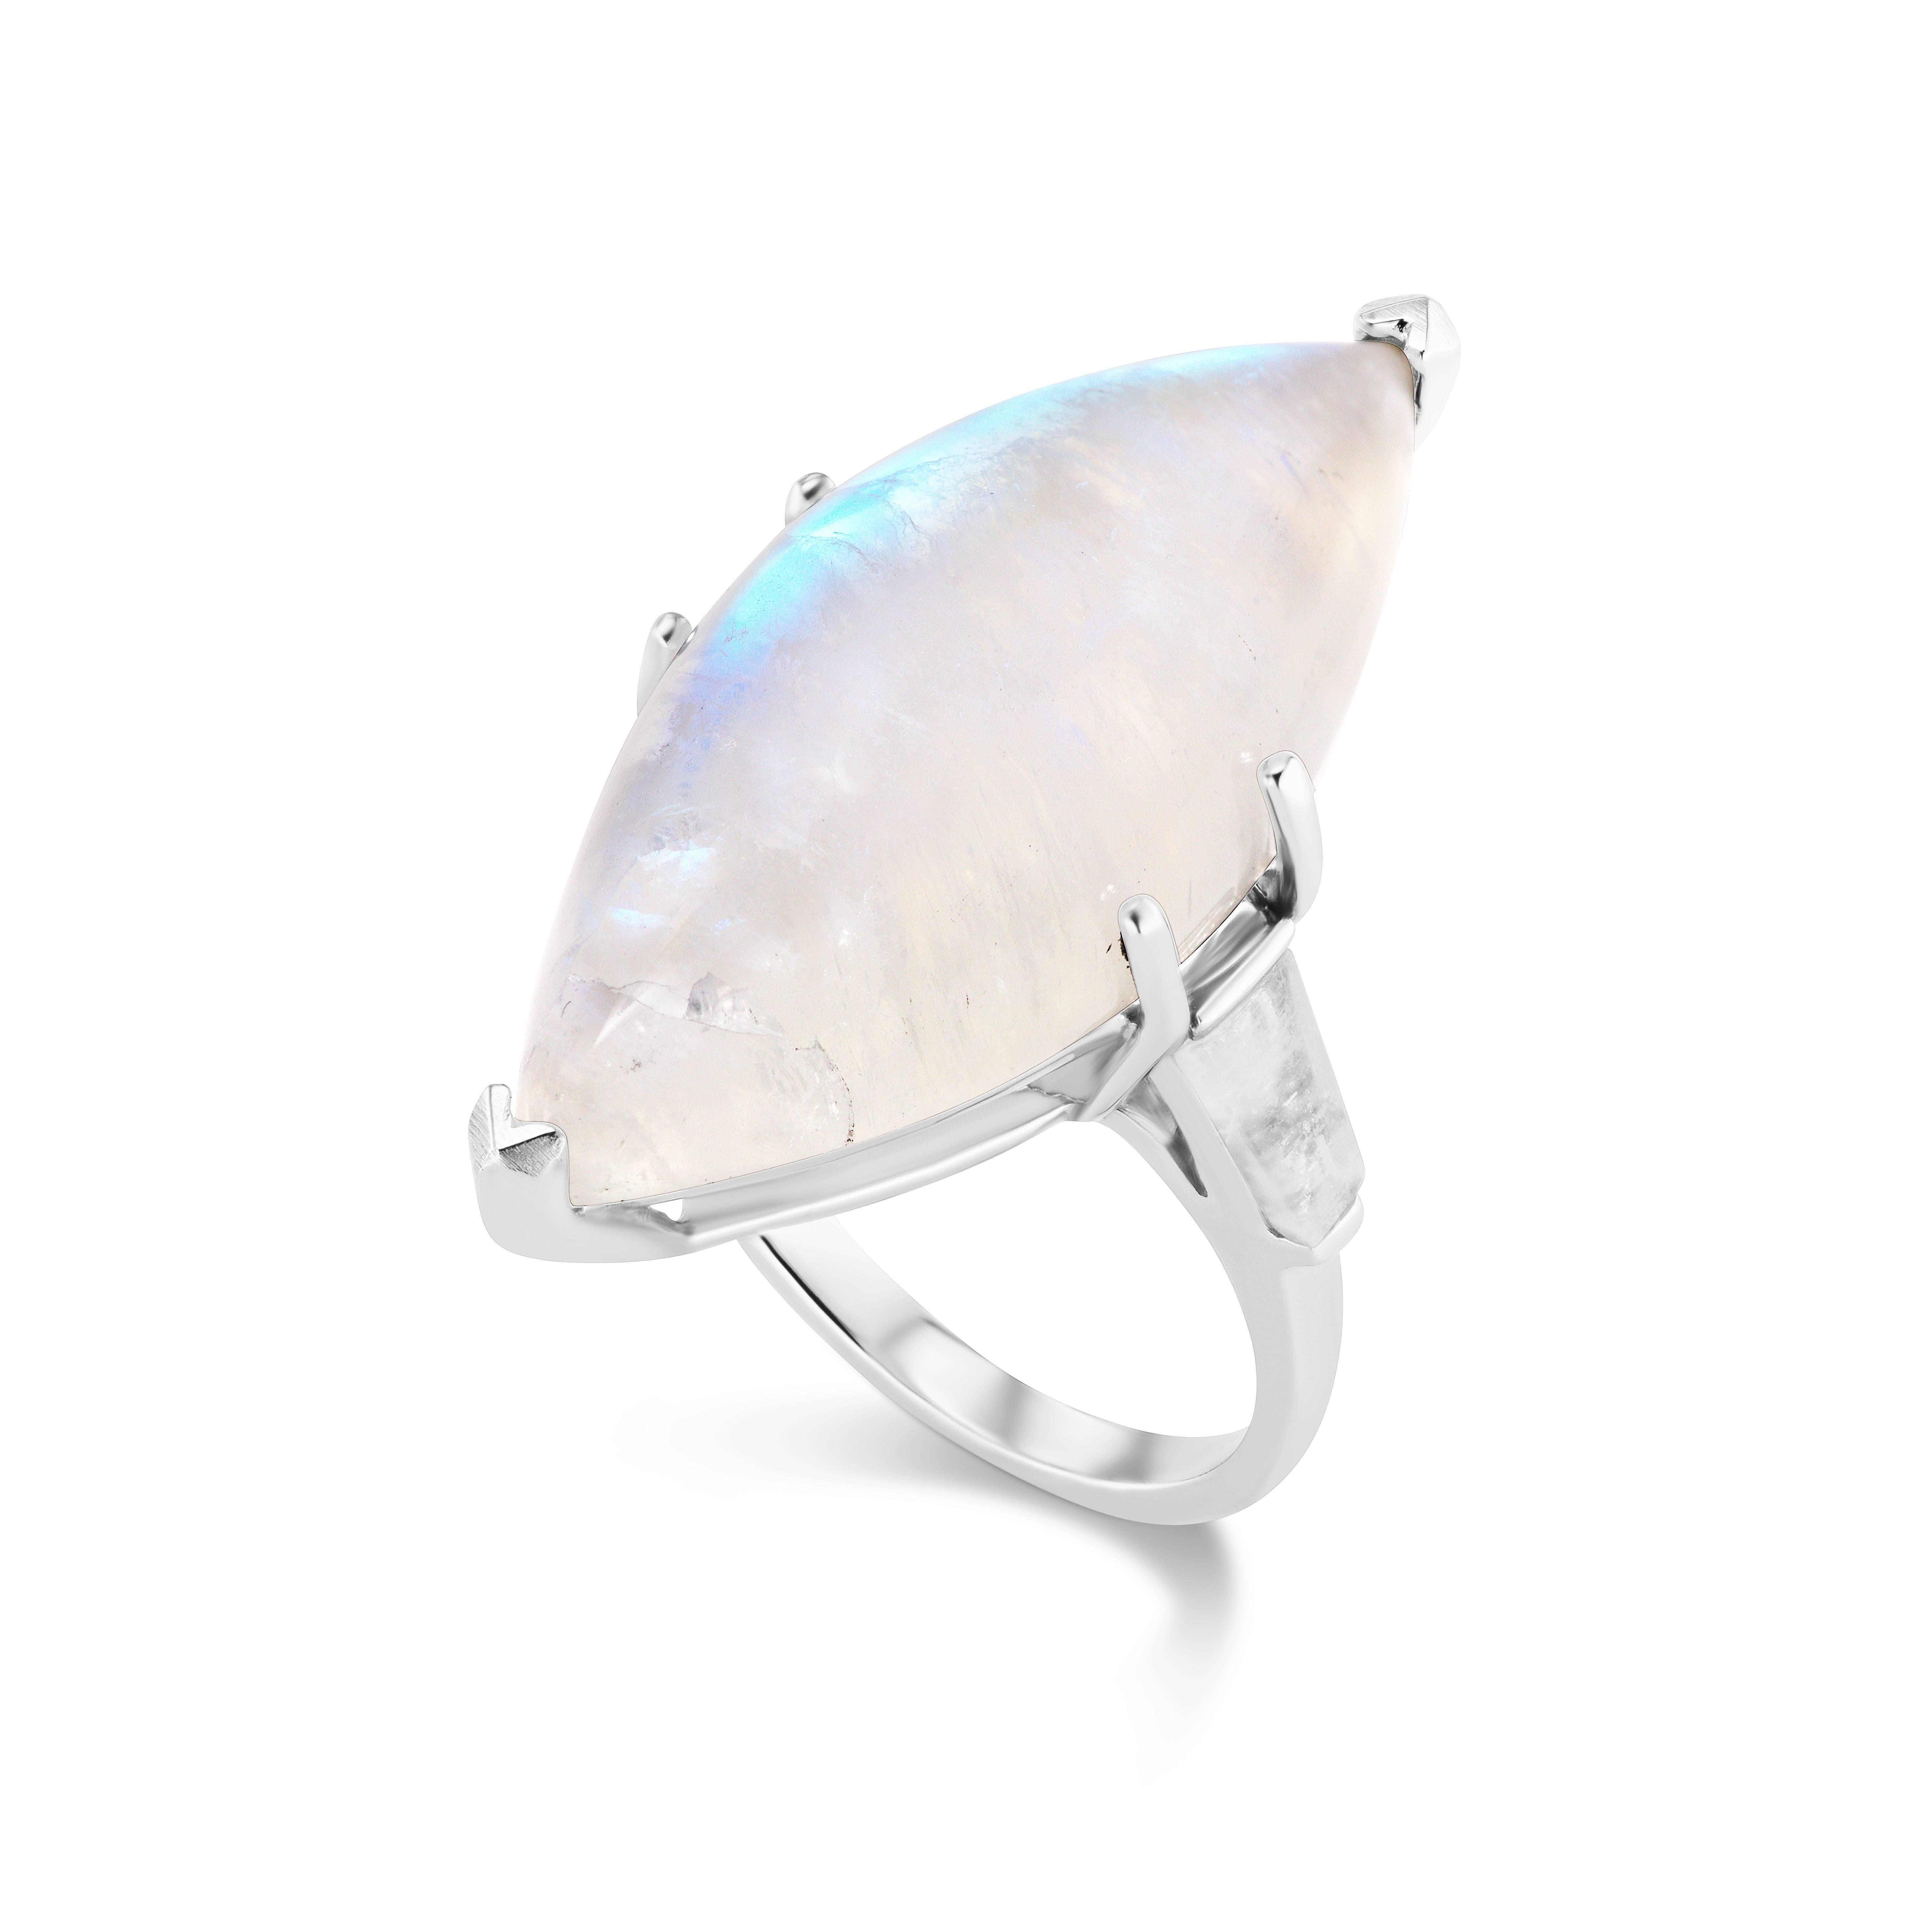 Elegant Marquise Moonstone Side with Moonstone Baguettes 10karat White Gold Ring. Free sizing. 1 1/4inches long